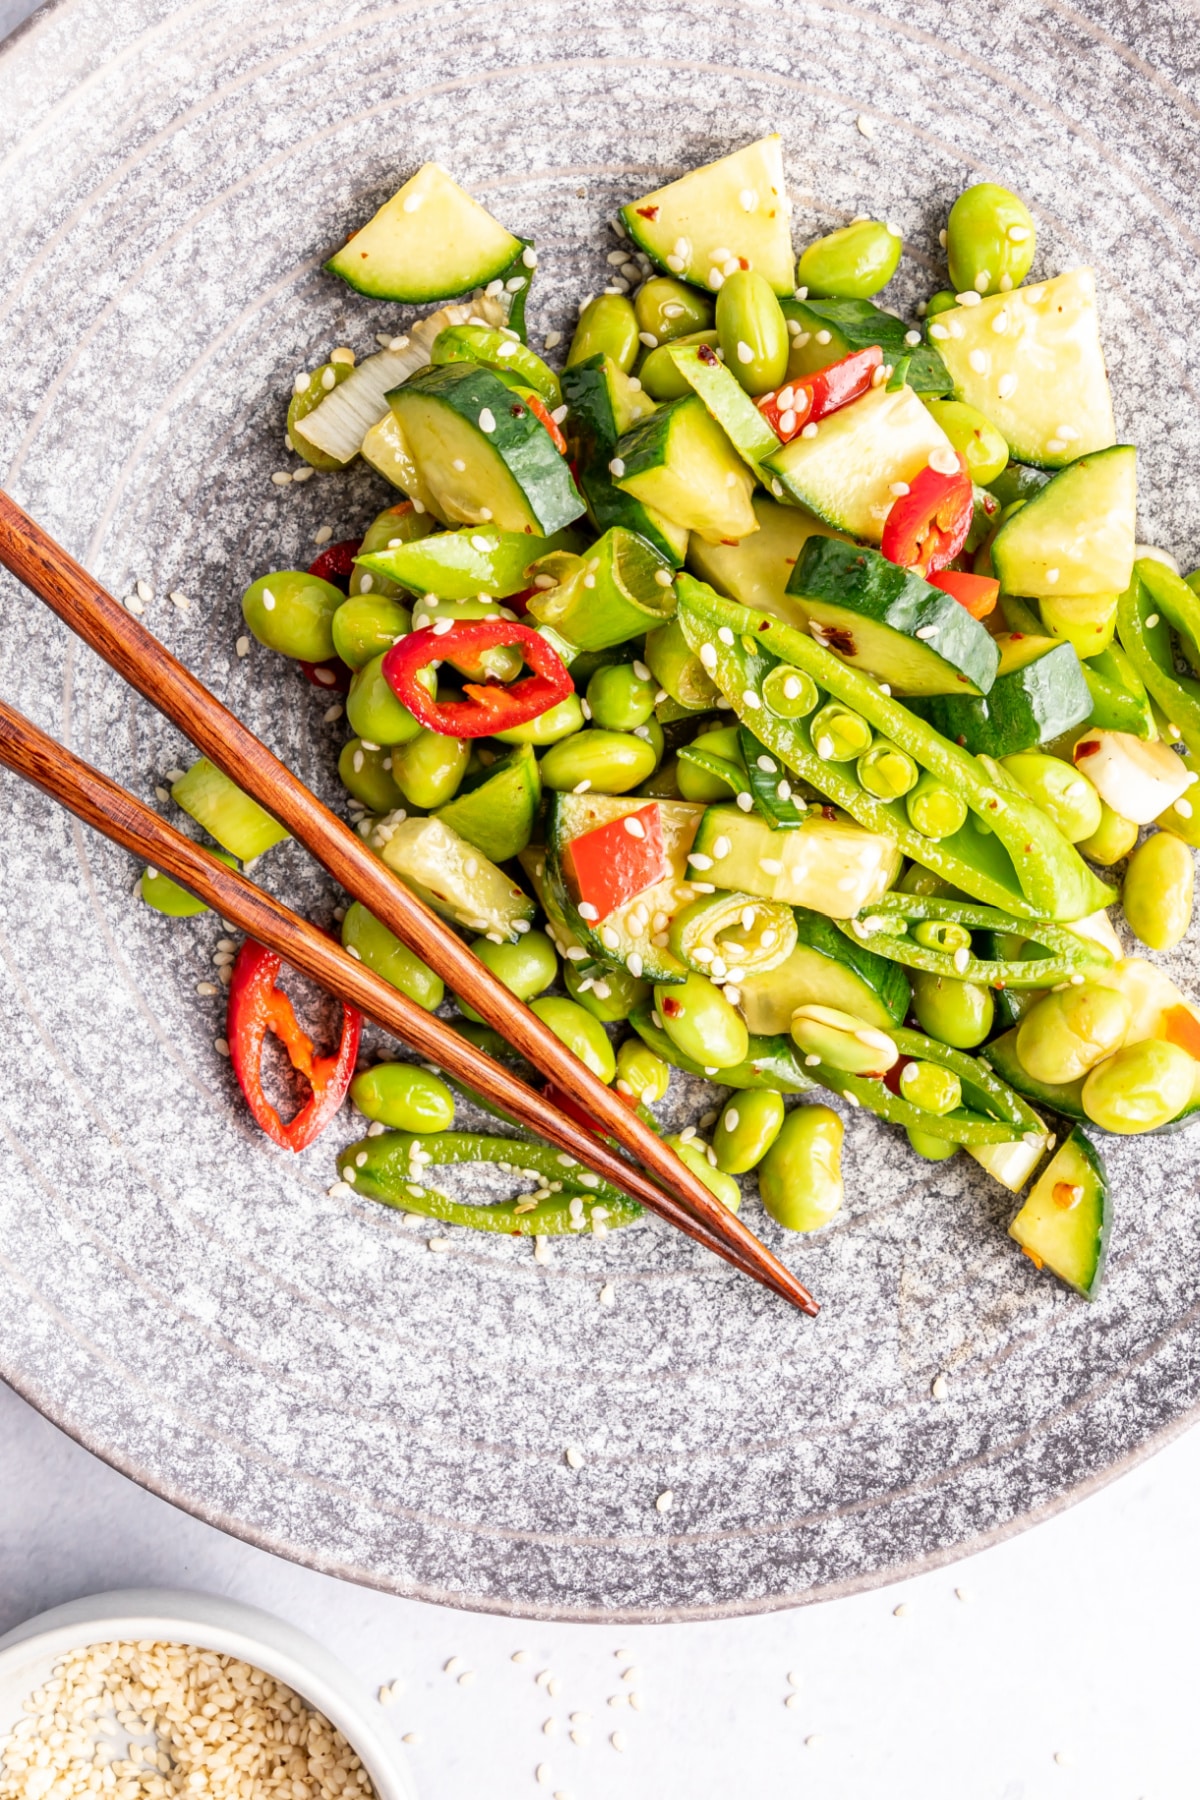 Overhead view of a single serving of edamame cucumber salad in a grey bowl with wooden chopsticks: salad has edamame, cucumber, snap peas, red bell pepper, green onions, chili peppers and sesame seeds.